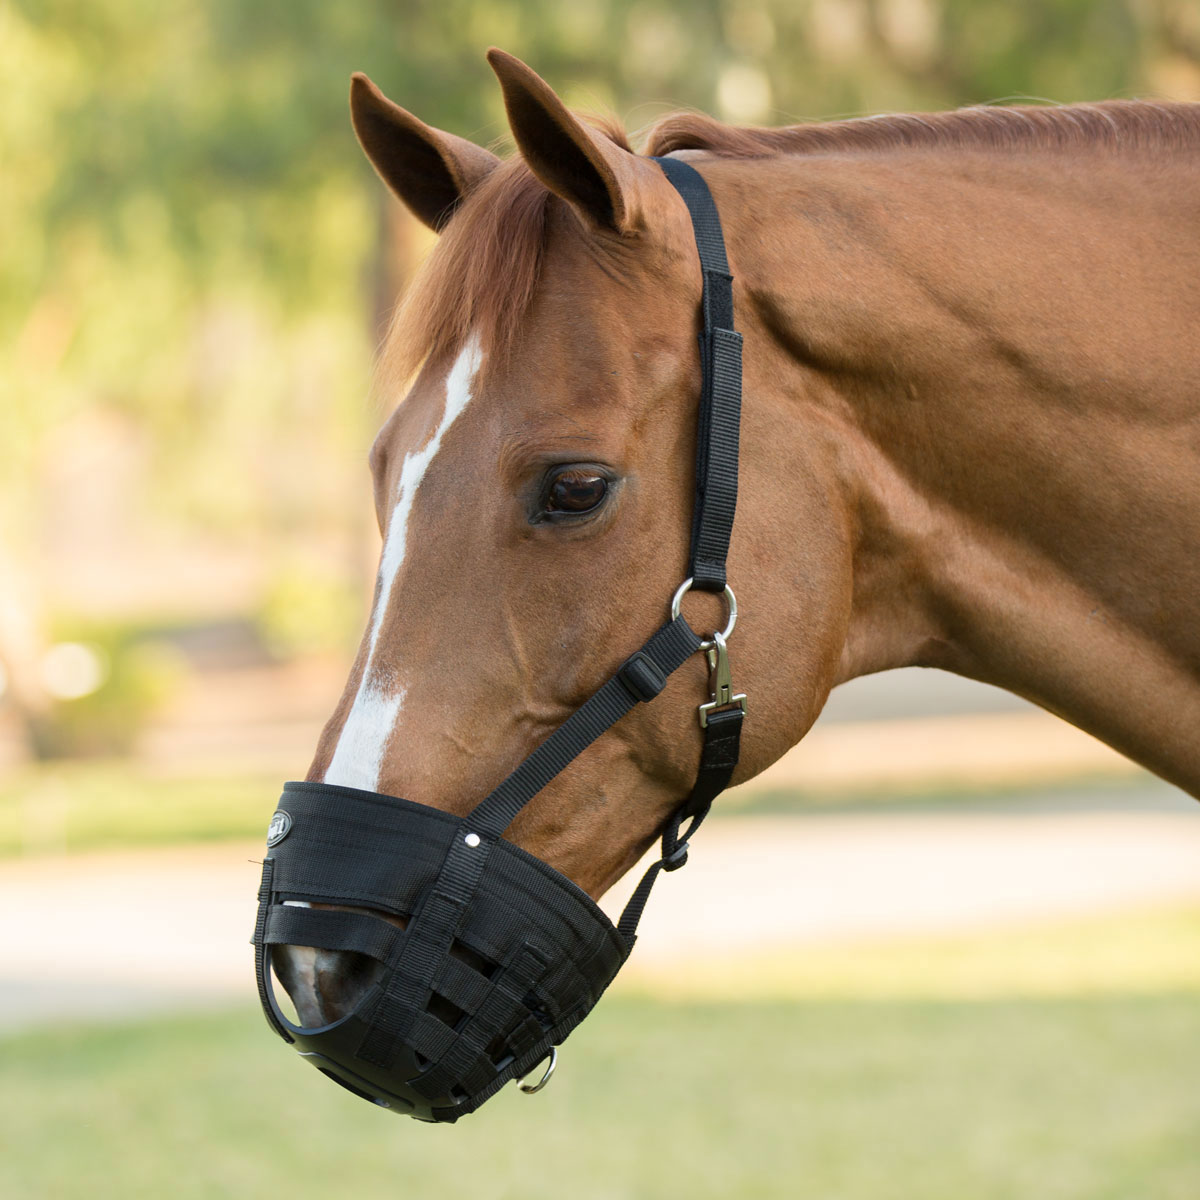 Uncovering the Location of a Horse’s Muzzle – Learn How!